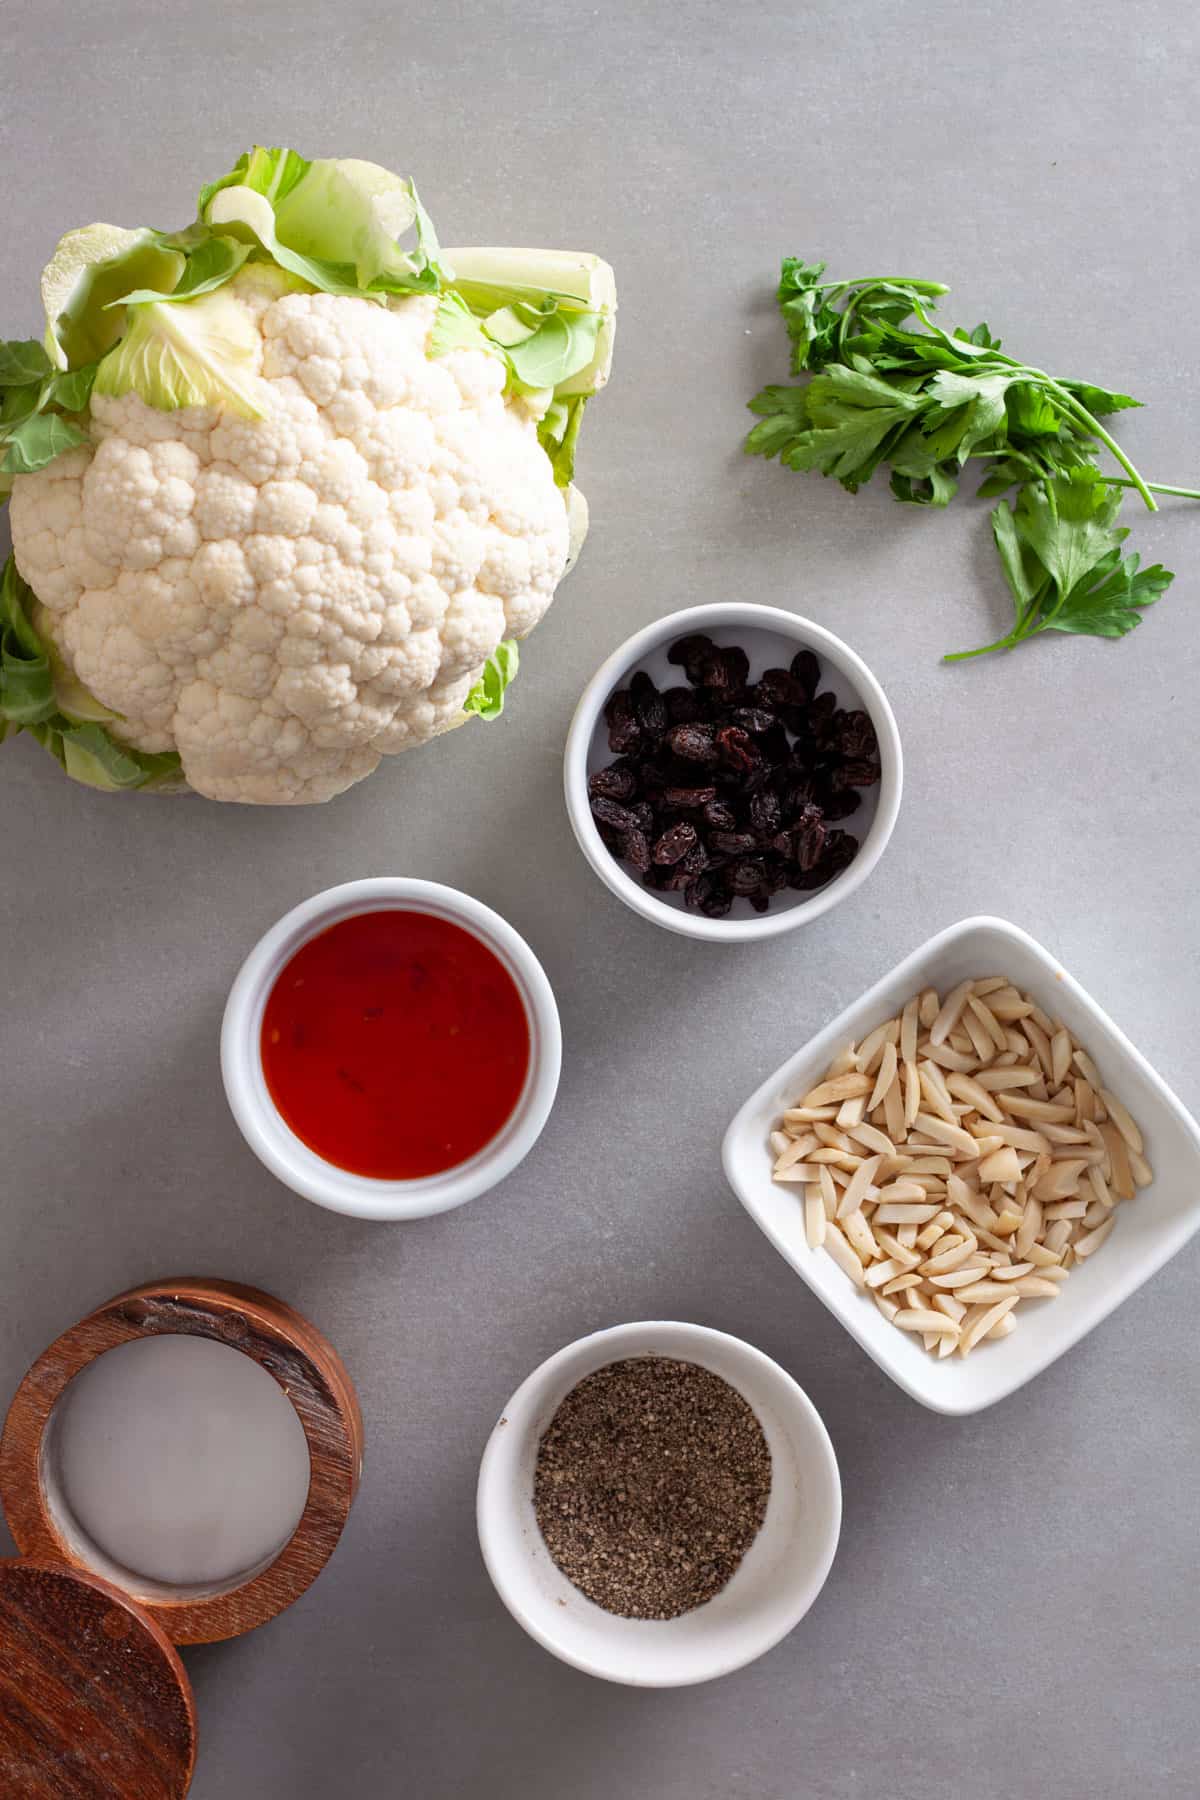 Ingredients for sweet chili roasted cauliflower with almonds on a gray table.